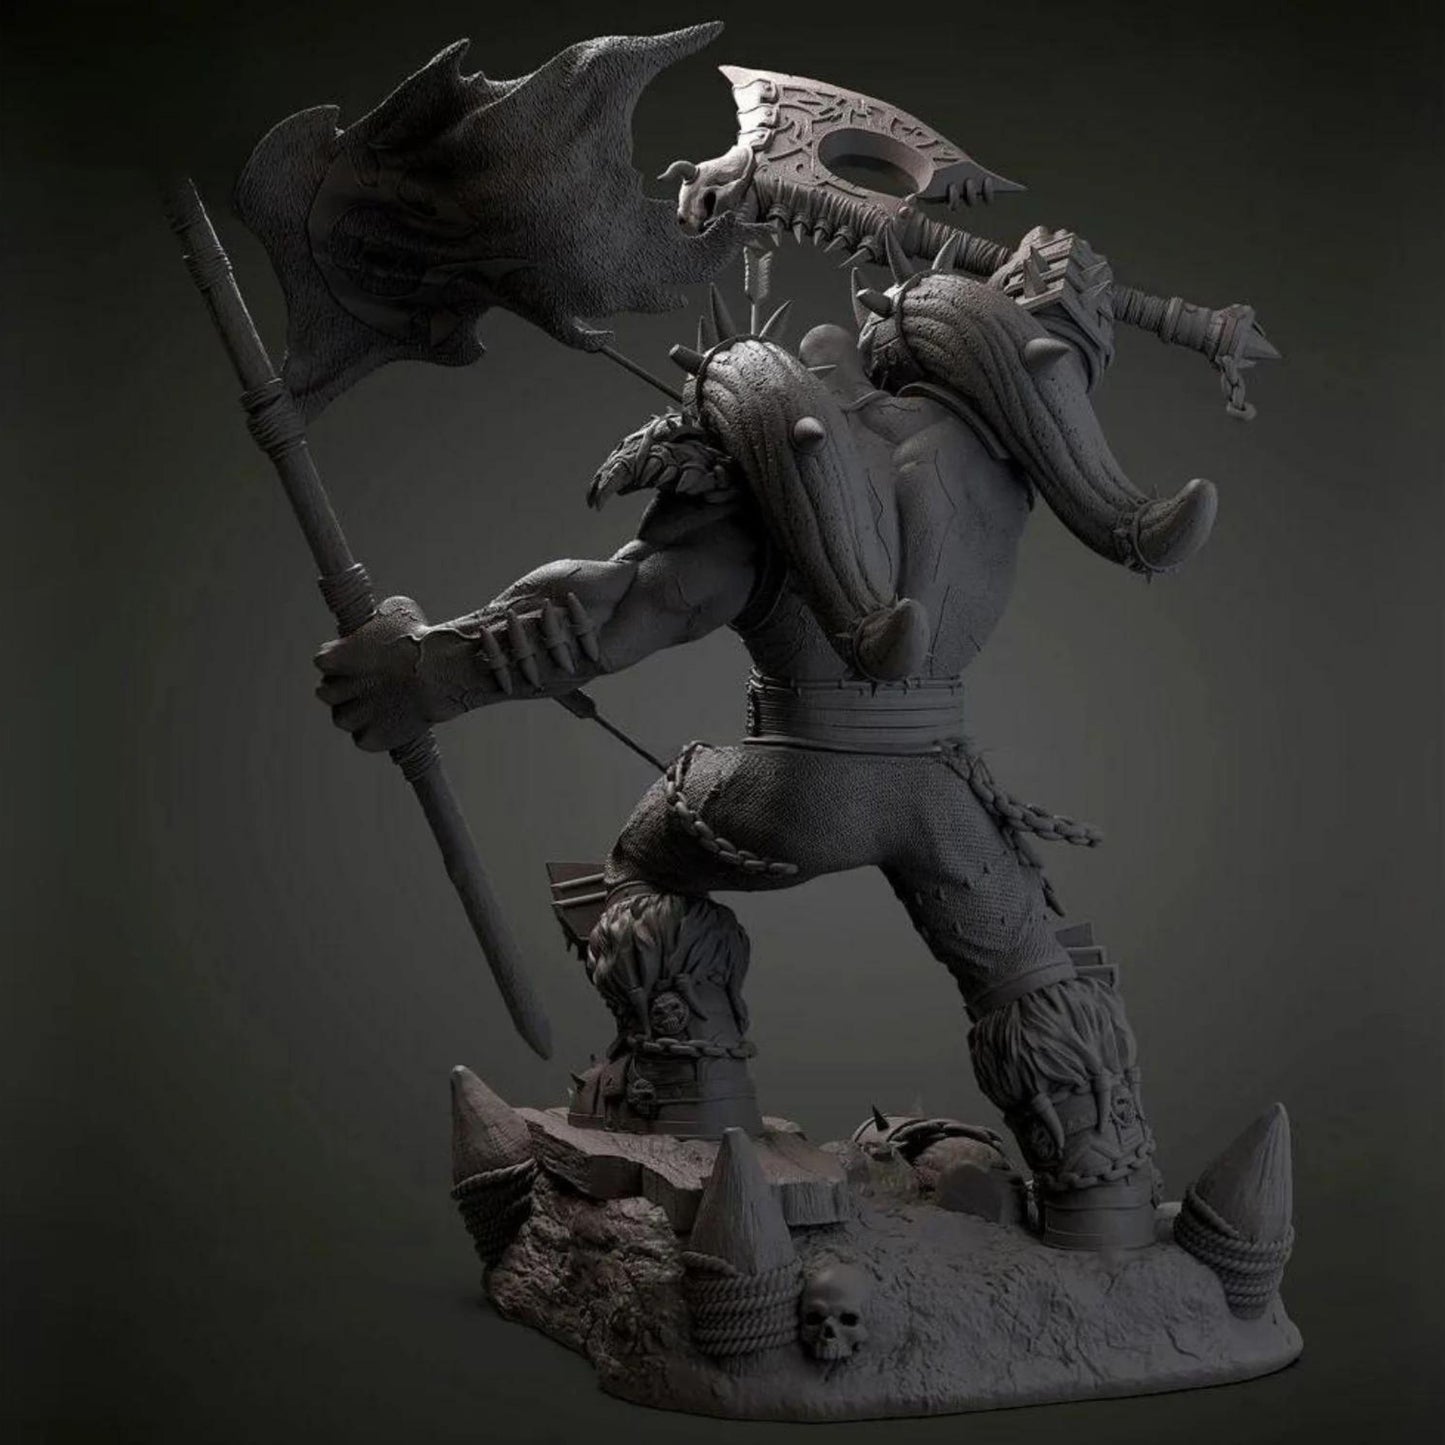 18+ Collector's 3D Printed Model: 80mm Resin model kits figure colorless and self-assembled.